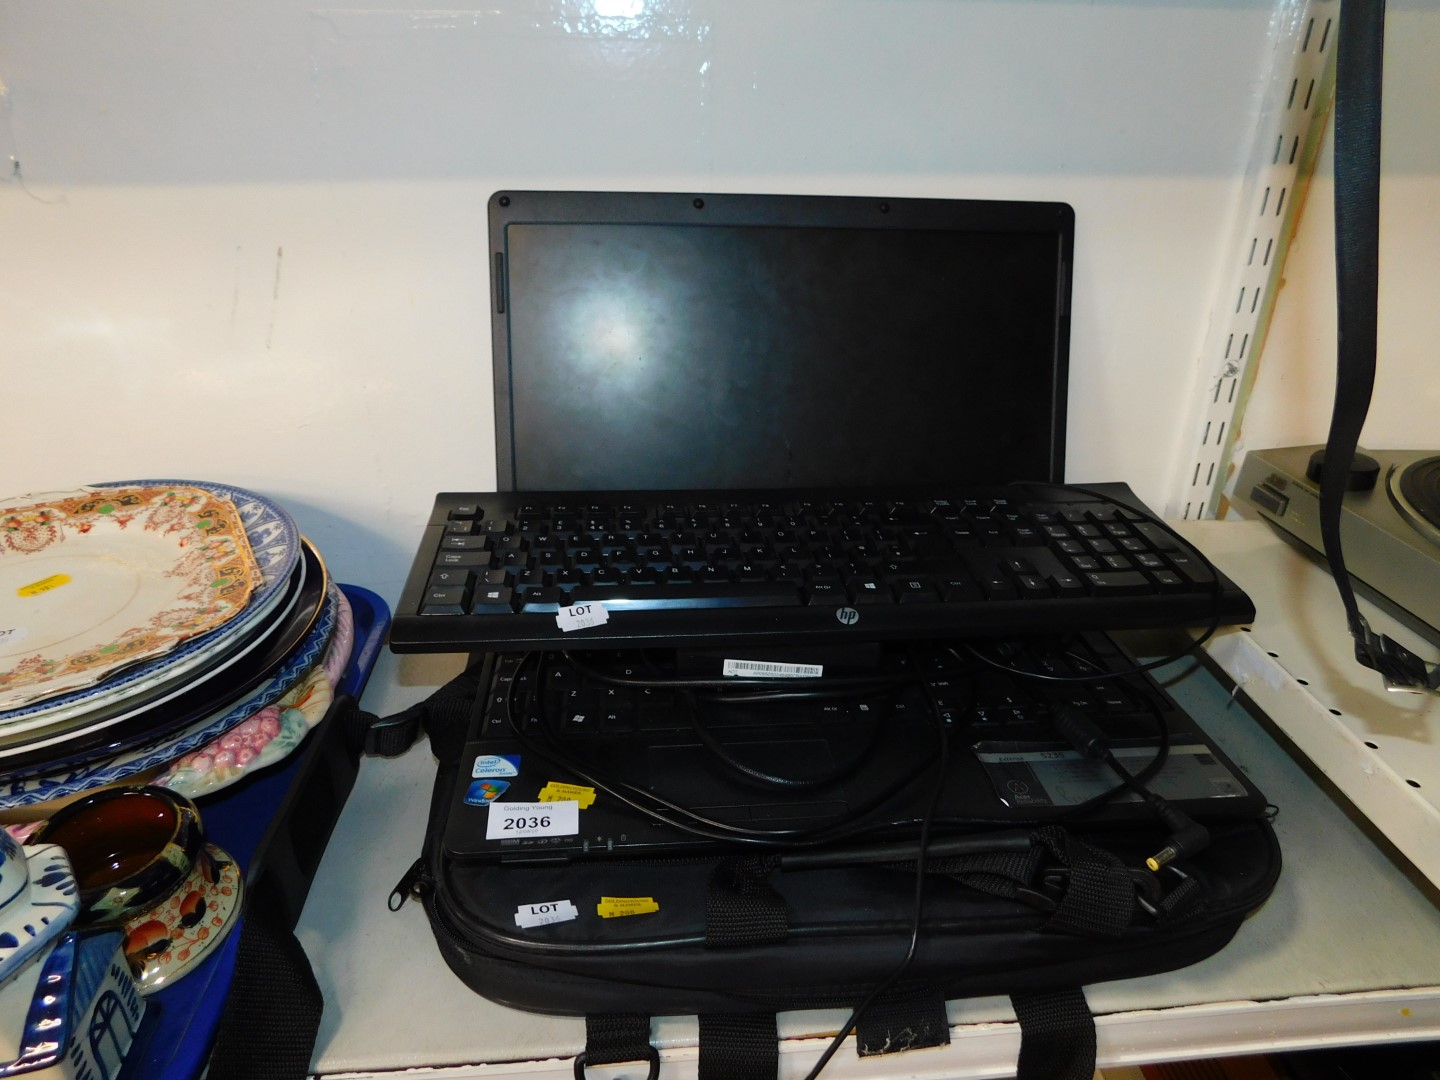 An Acer Extensa 5235 laptop computer, together with HP keyboard model K45, cased, etc.